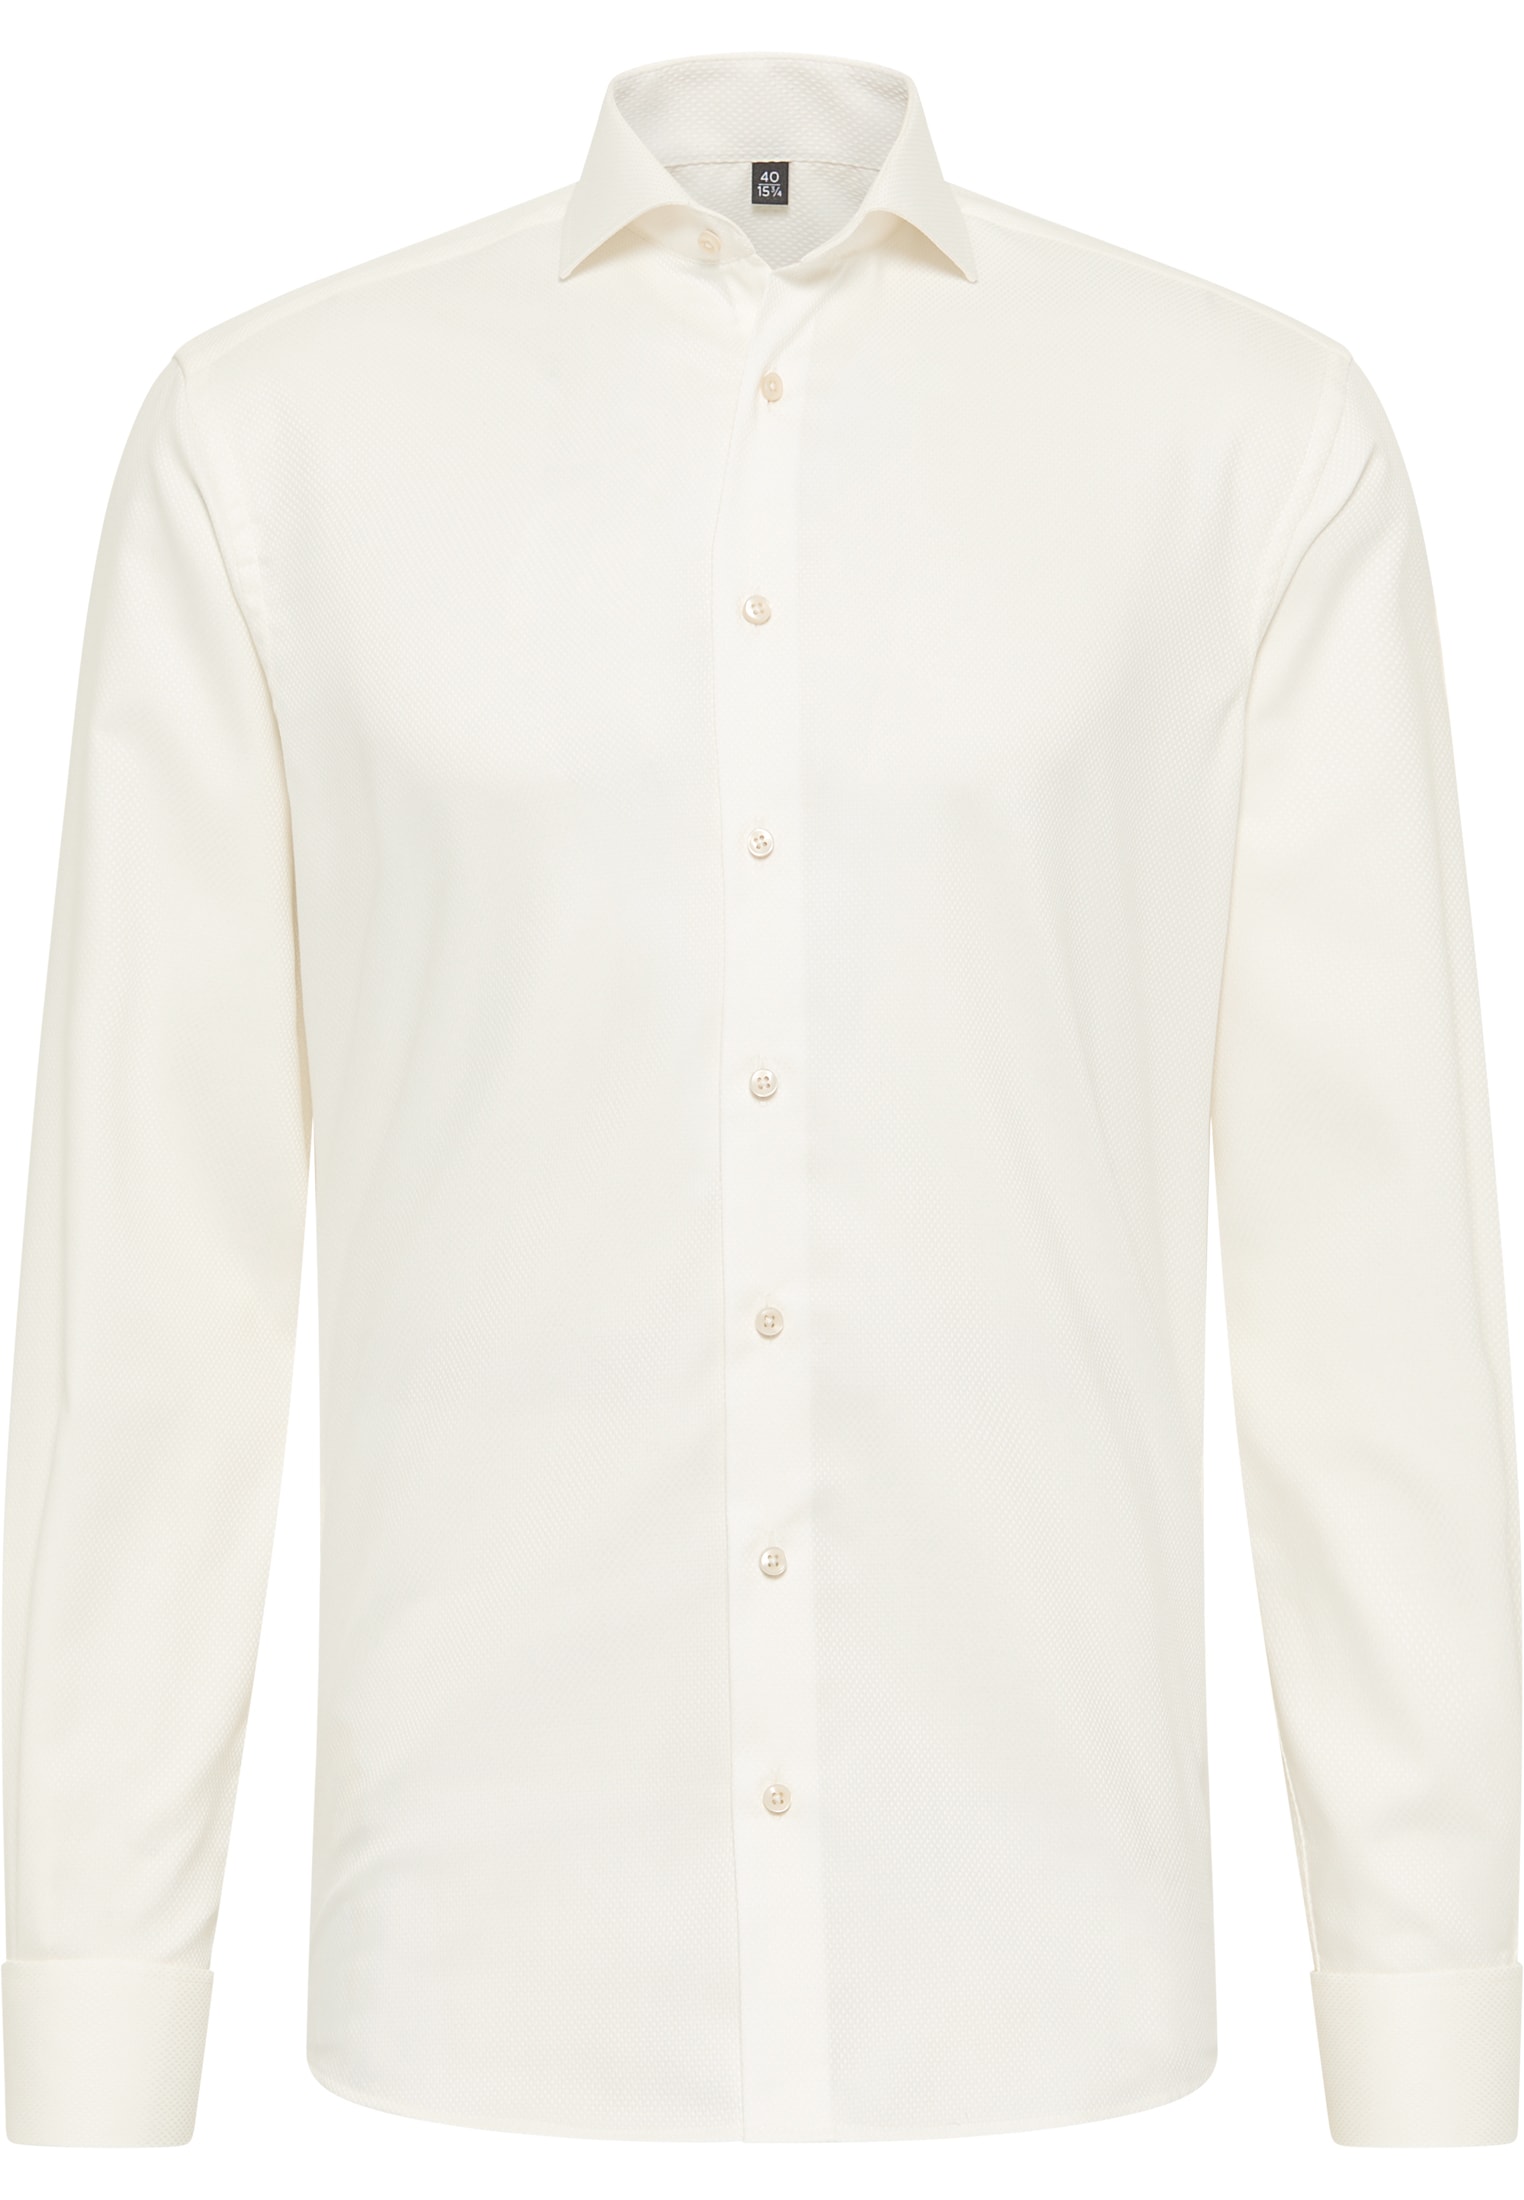 MODERN FIT Shirt in champagne structured